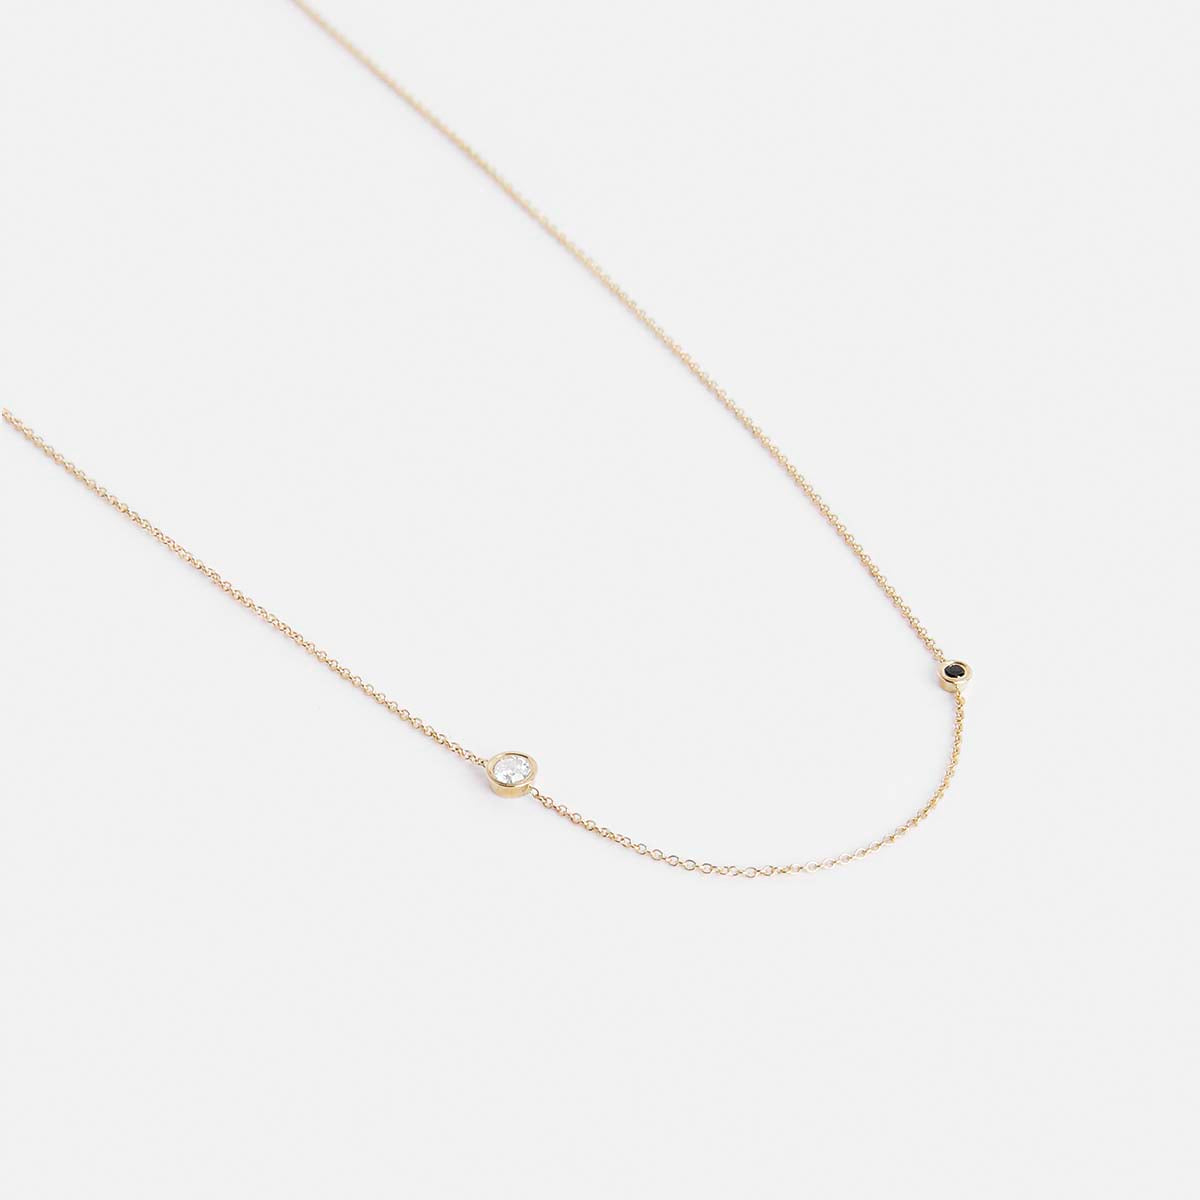 Iba Simple Necklace in 14k Gold set with Black and White Diamonds By SHW Fine Jewelry NYC